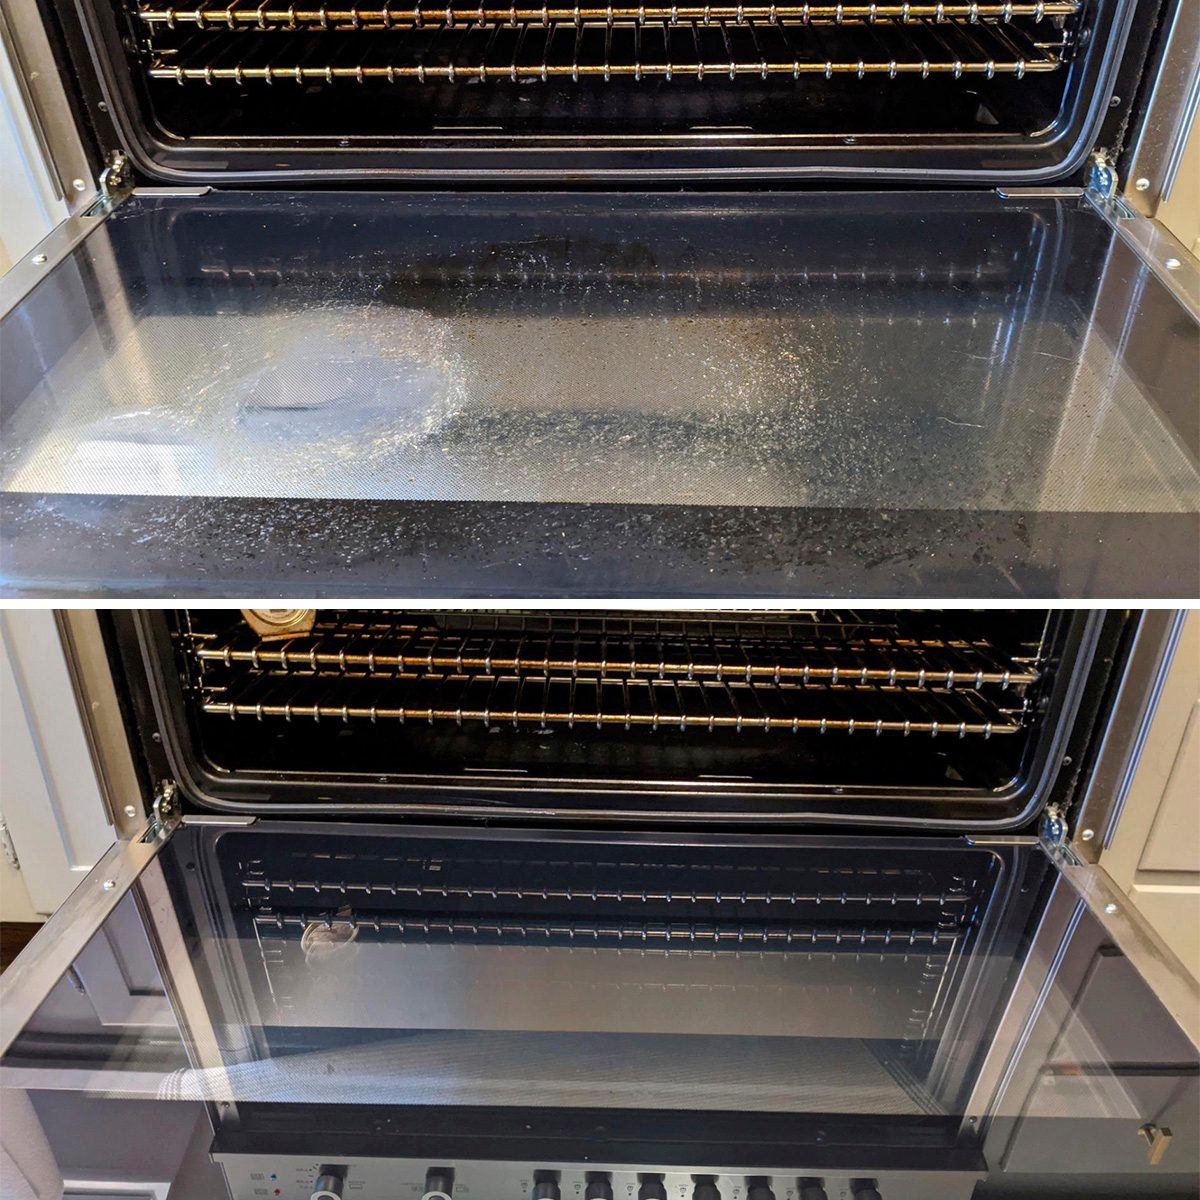 Before and After Oven Cleaning Photos 2022